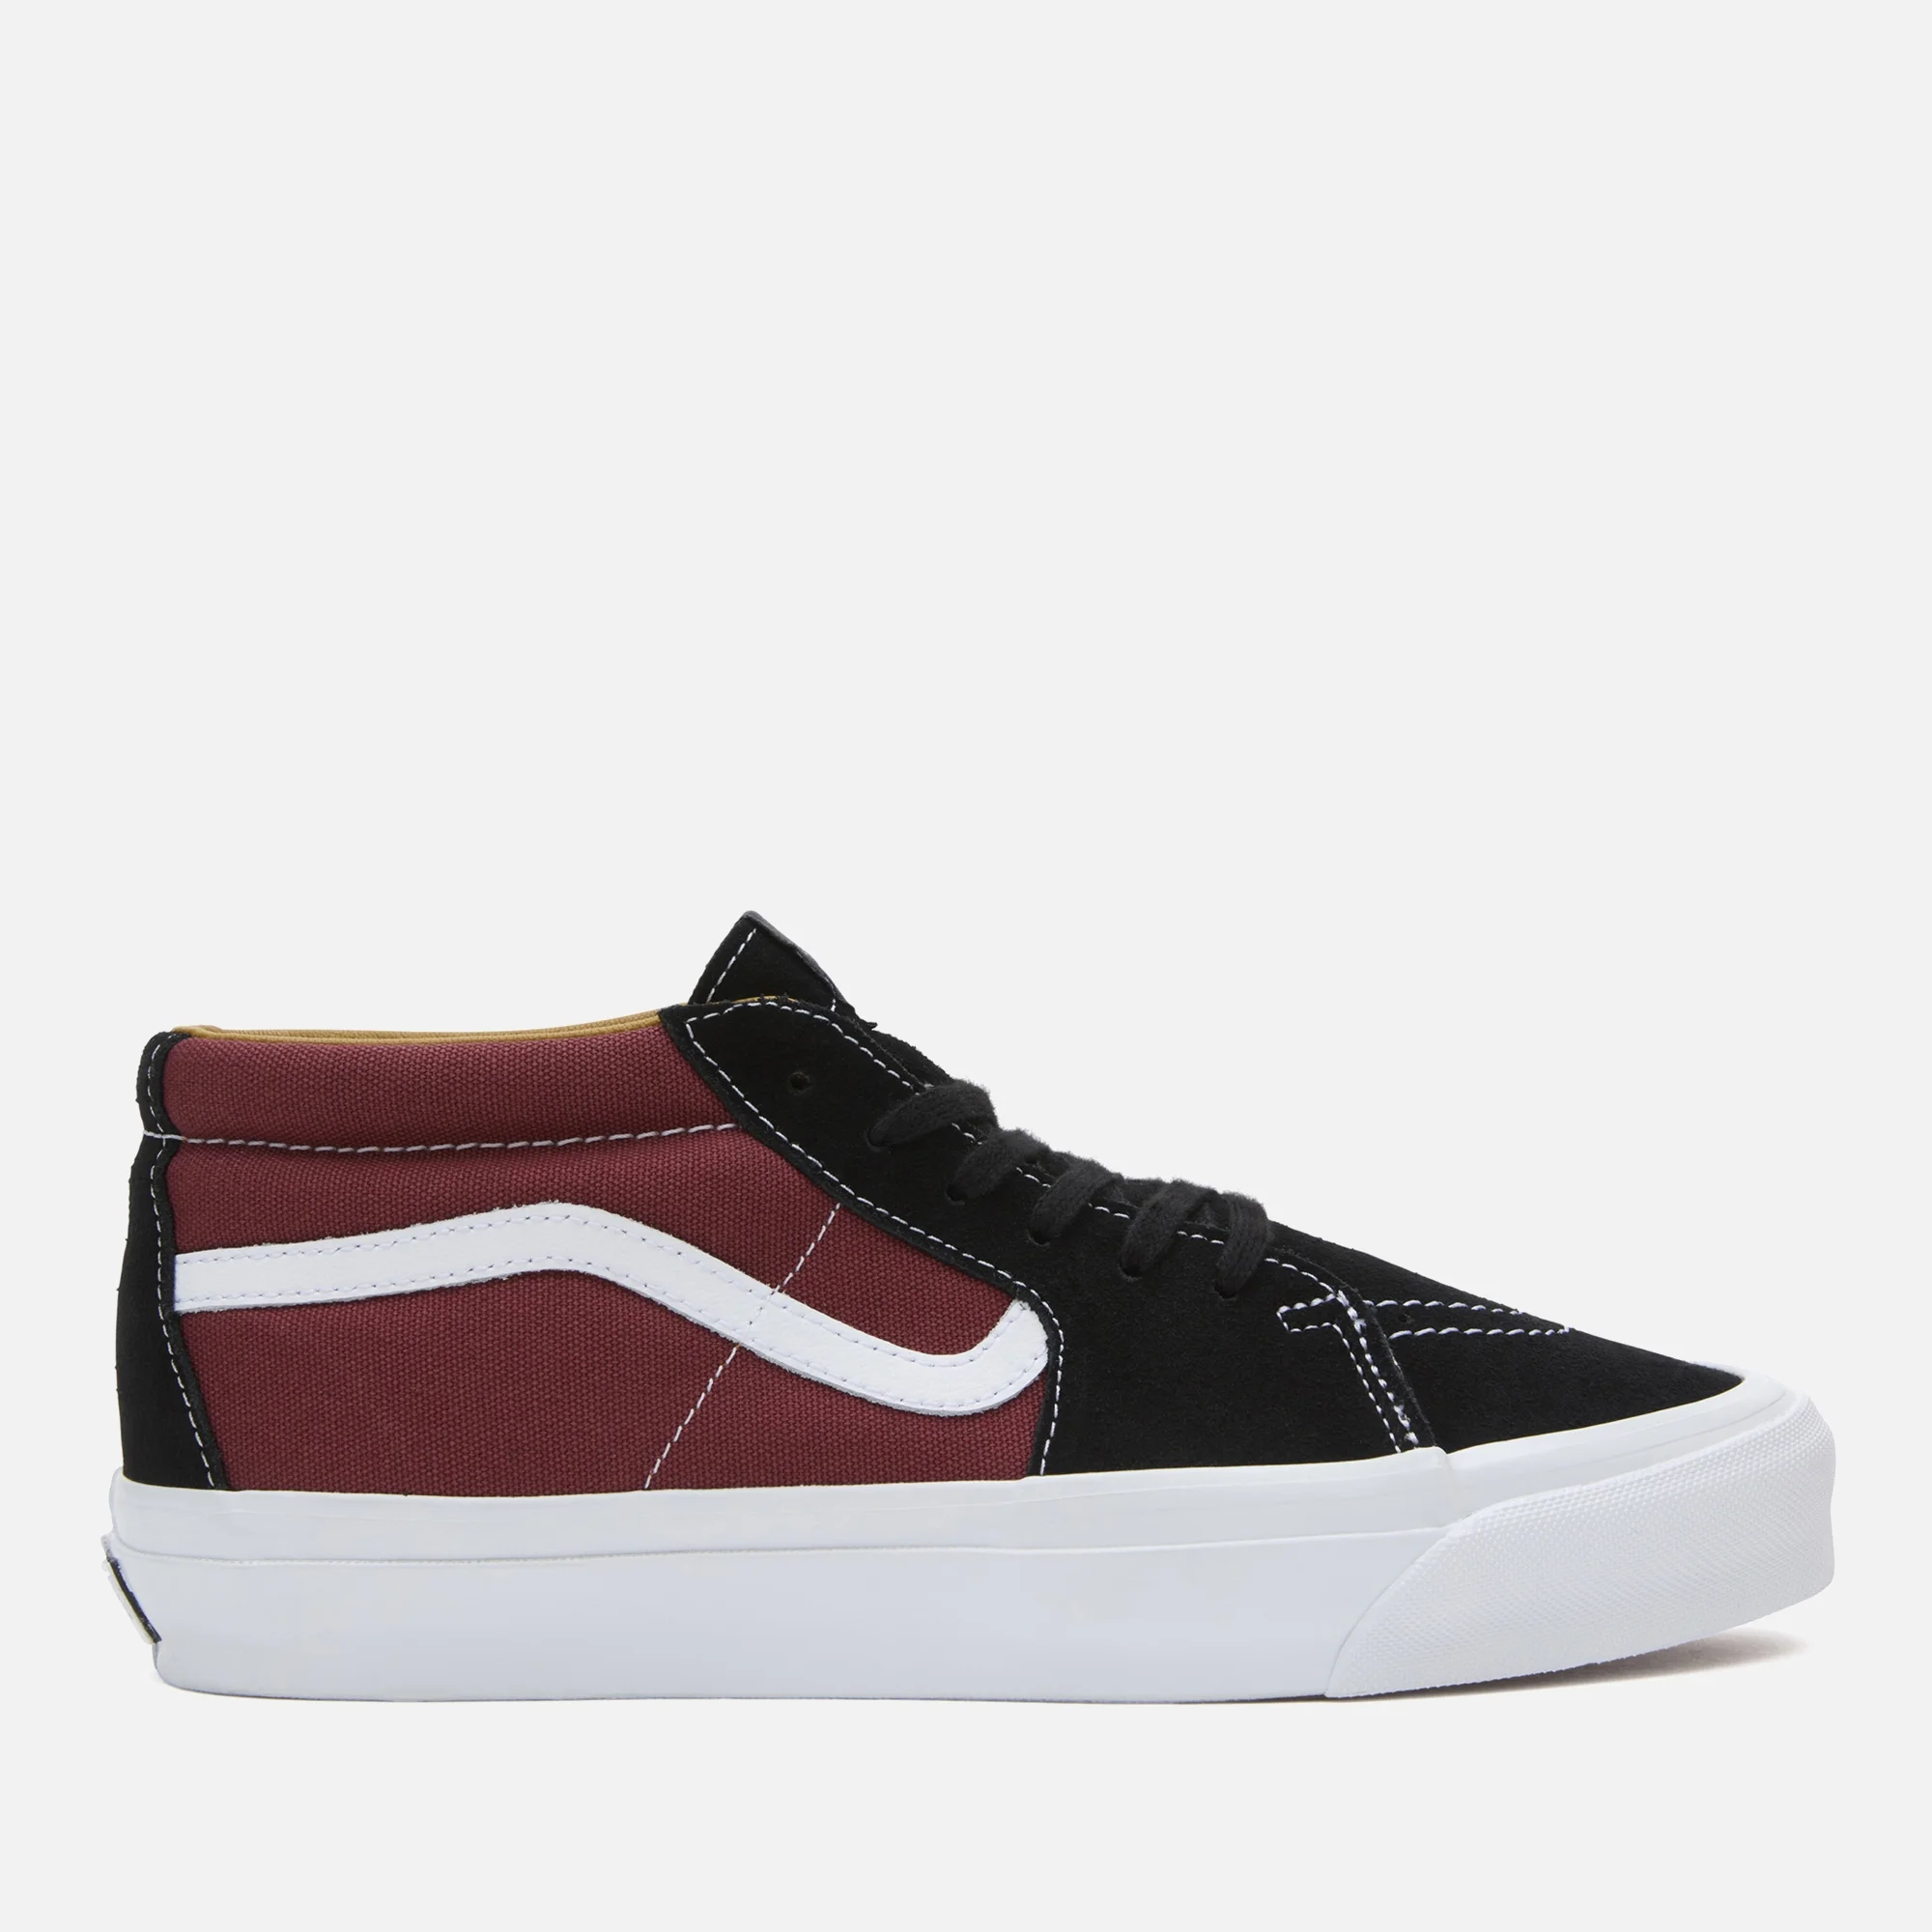 Vans Unisex Sk8-Mid Reissue 83 Canvas and Suede Trainers Image 1